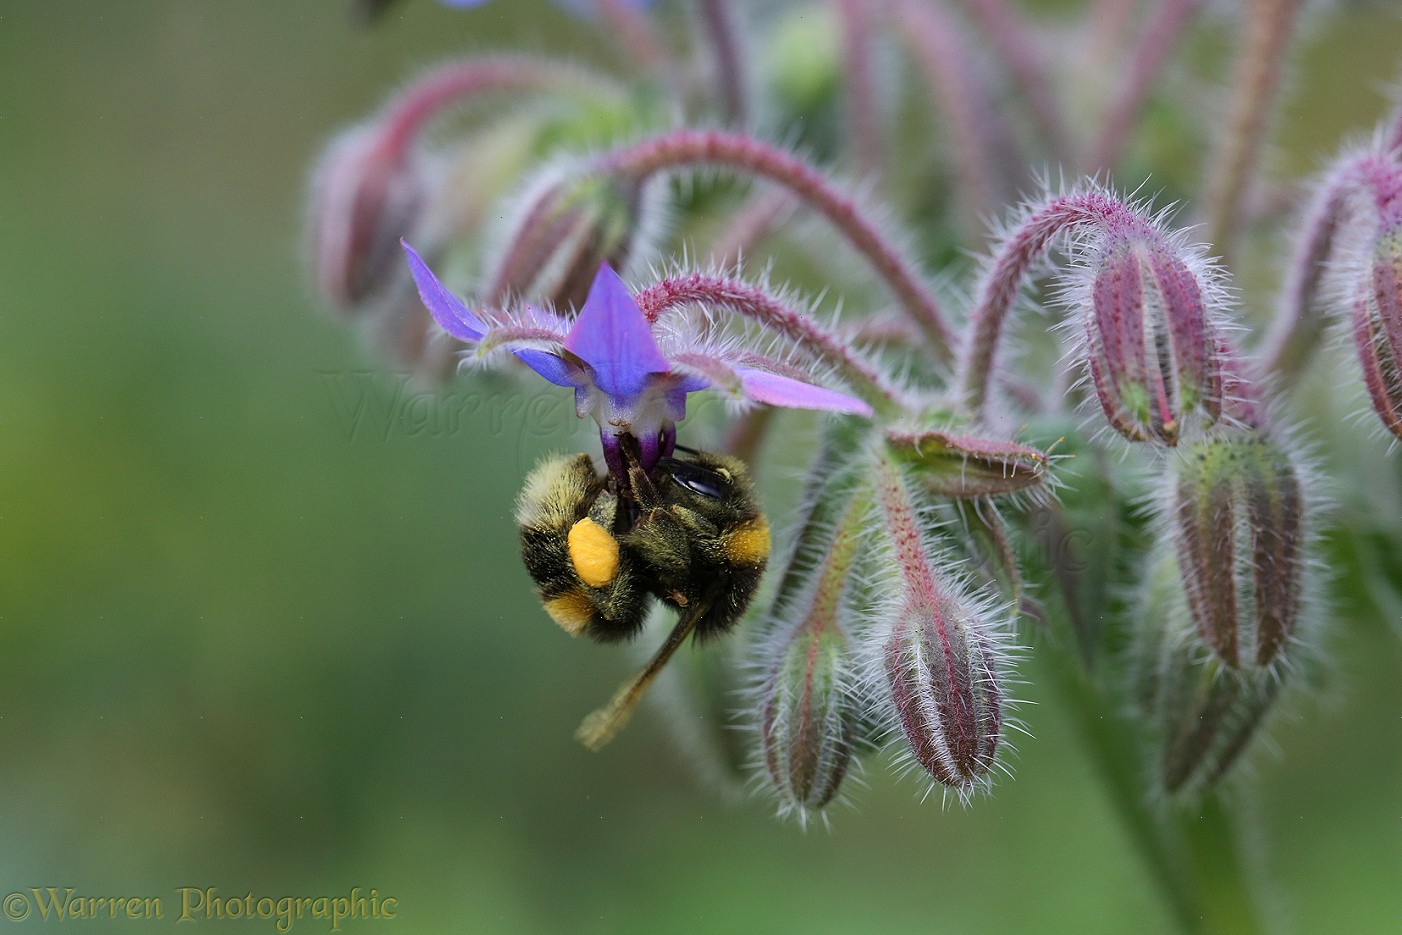 White-tailed Bumblebee worker with full pollen sacs visiting Borage flower  photo WP38528